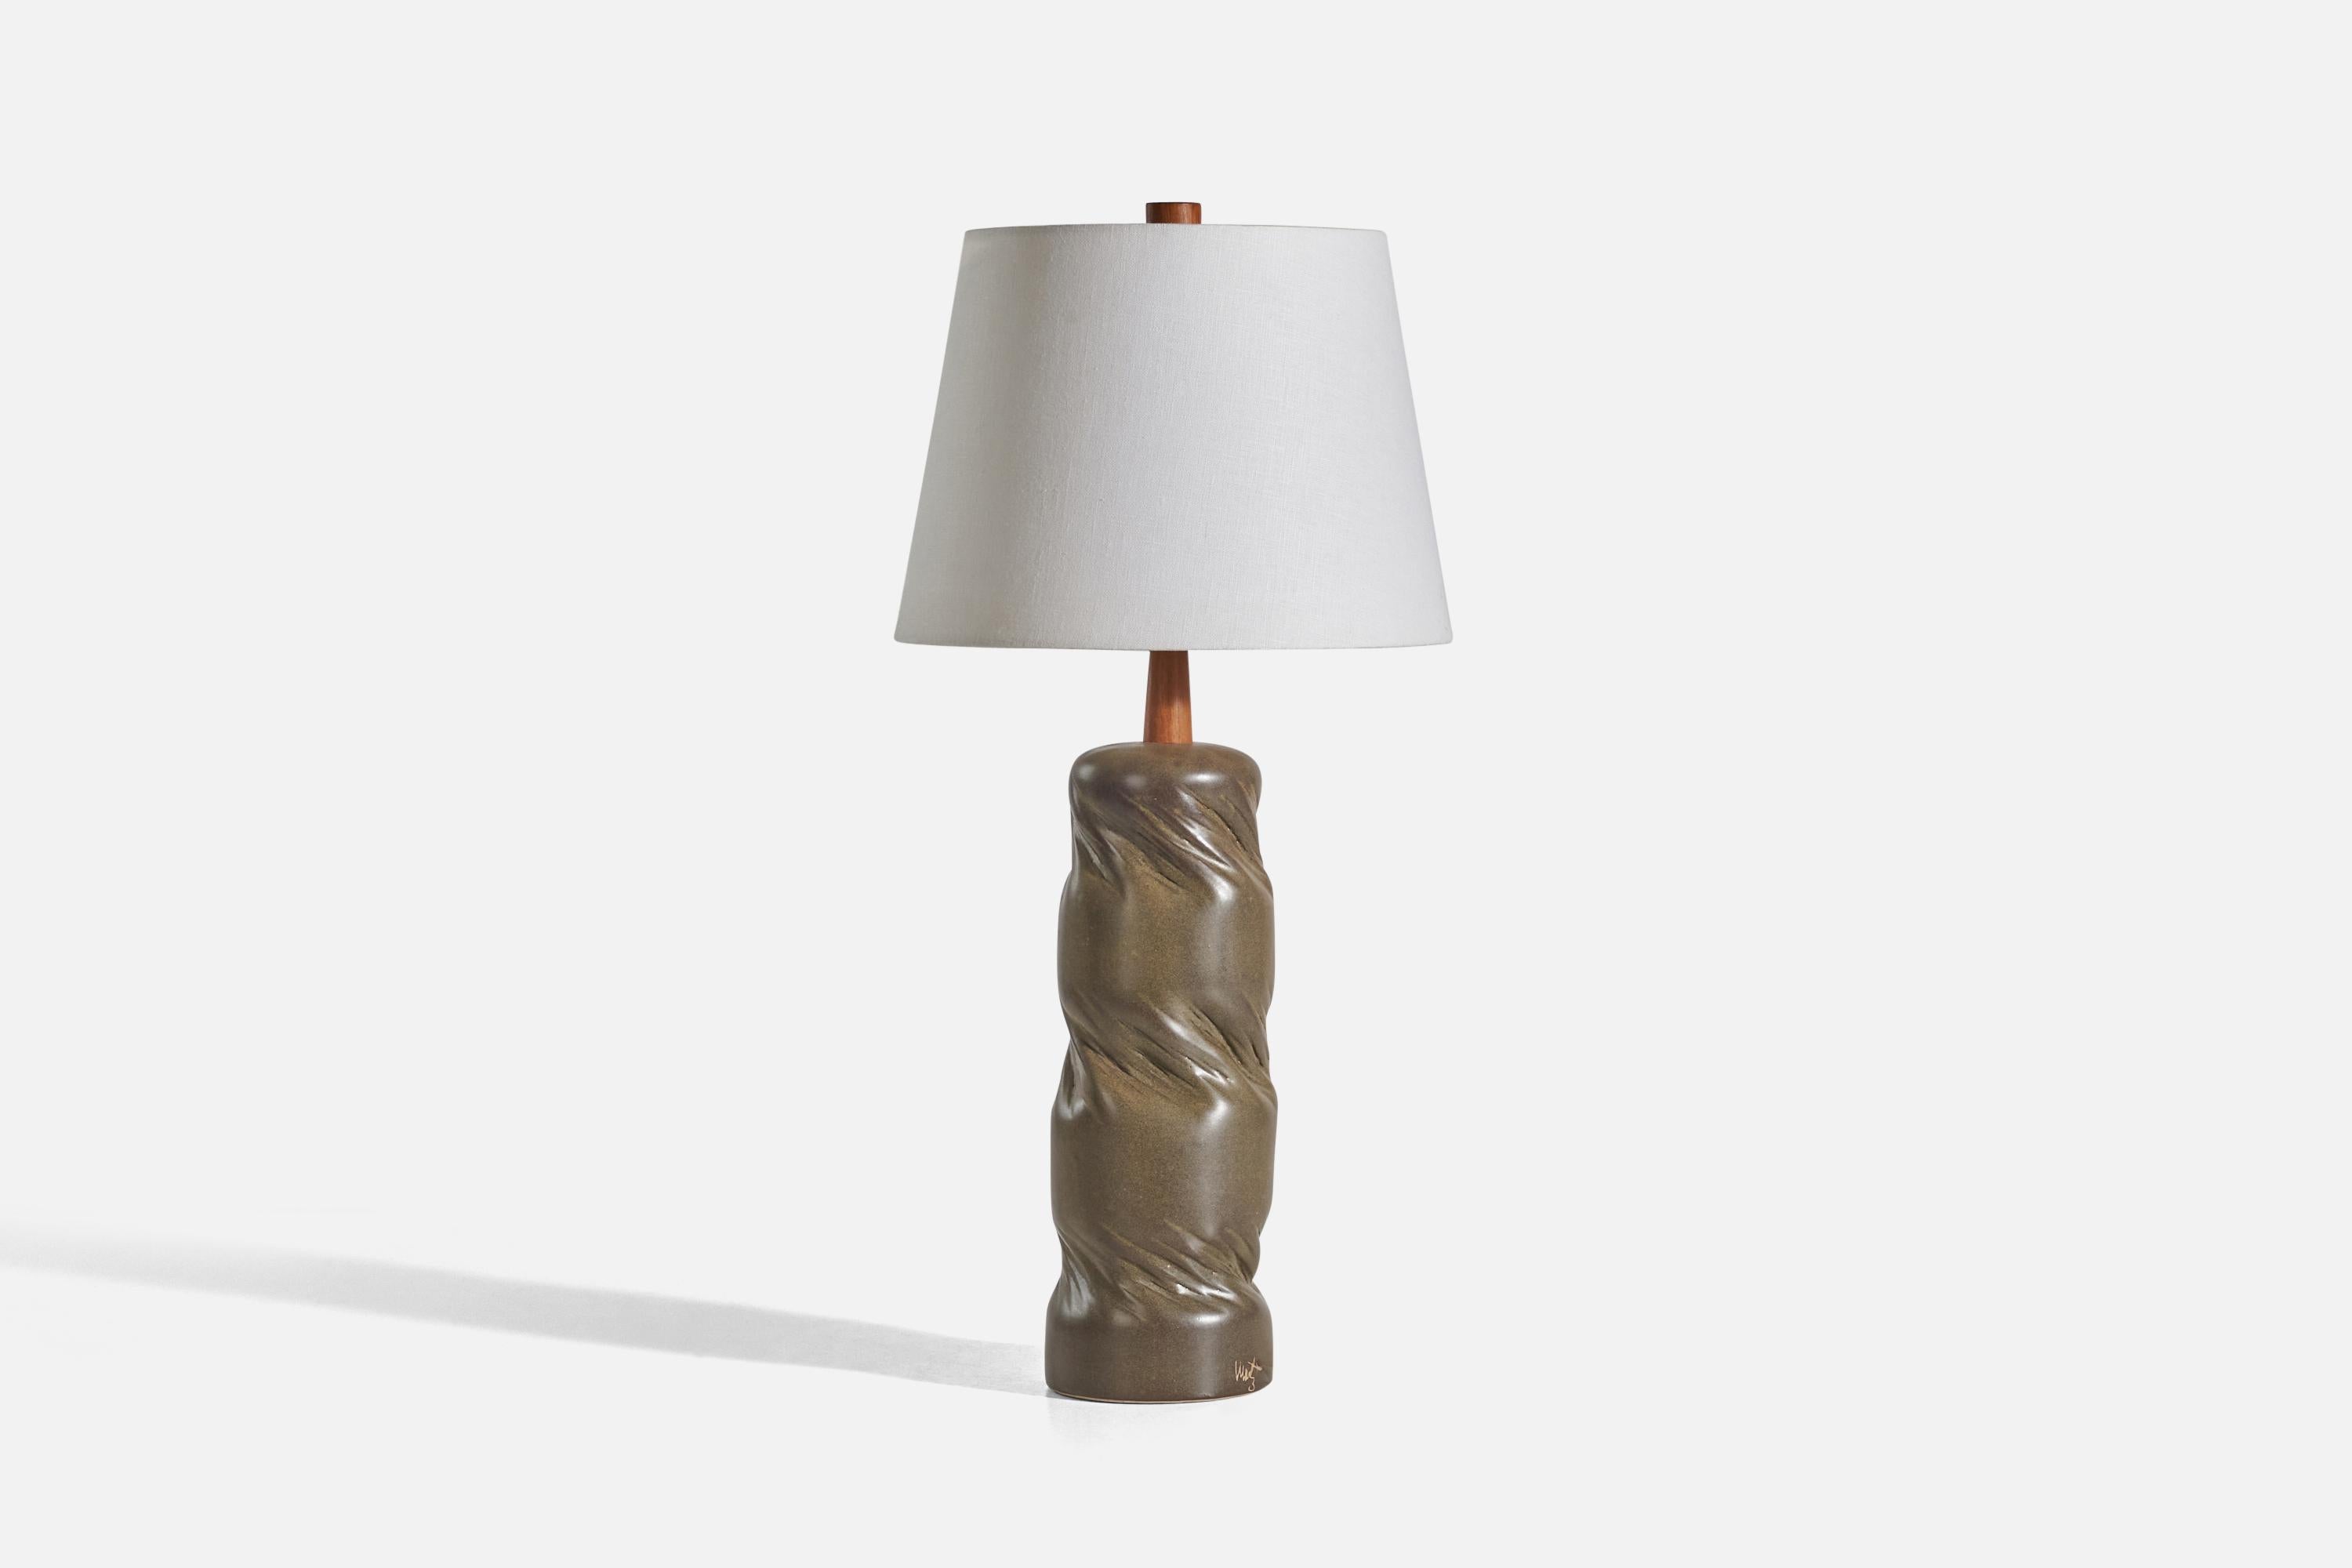 A brown ceramic and walnut table lamp designed by Jane & Gordon Martz and produced by Marshall Studios, Indianapolis, 1960s. 

Sold without lampshade.
Dimensions of lamp (inches) : 19.25 x 5.03 x 5.03 (Height x Width x Depth)
Dimensions of